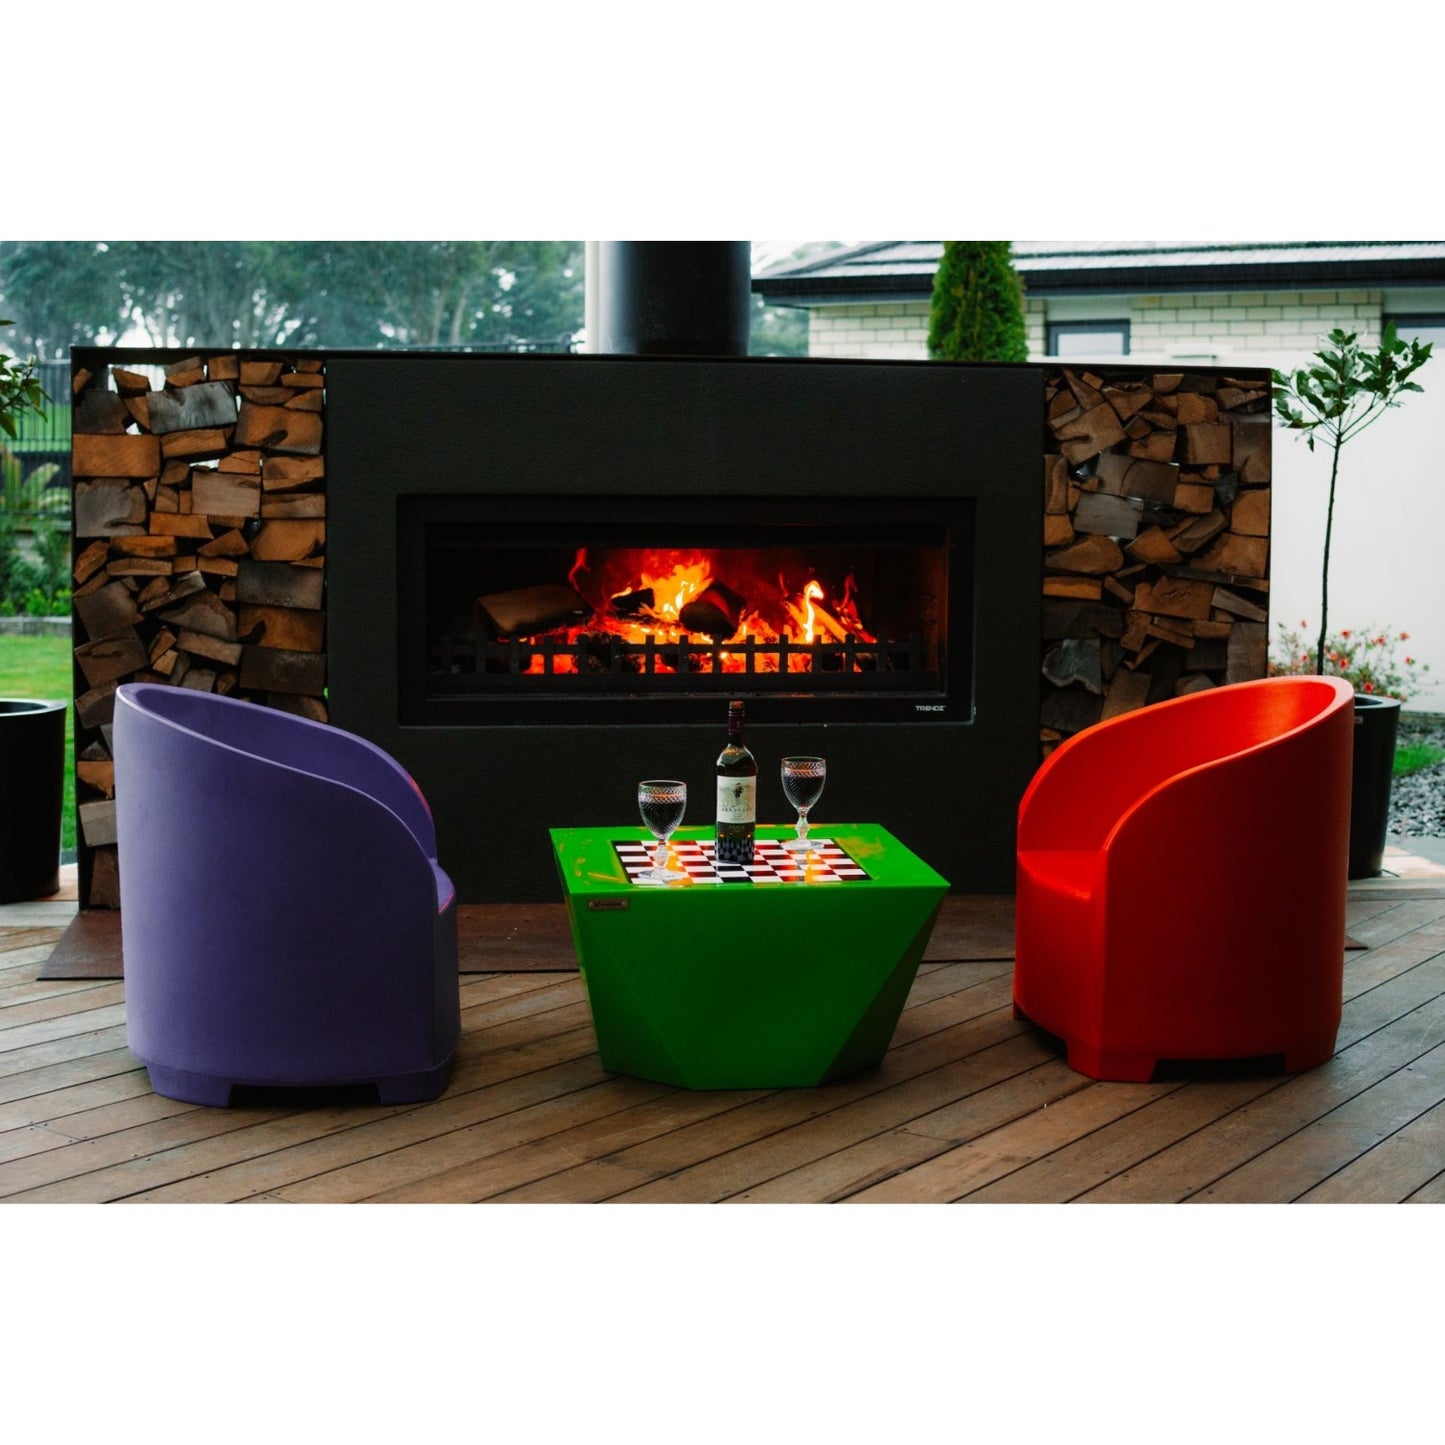 Colourful Modscene outdoor furniture on a veranda in front of a Trendz Outdoors fireplace. 